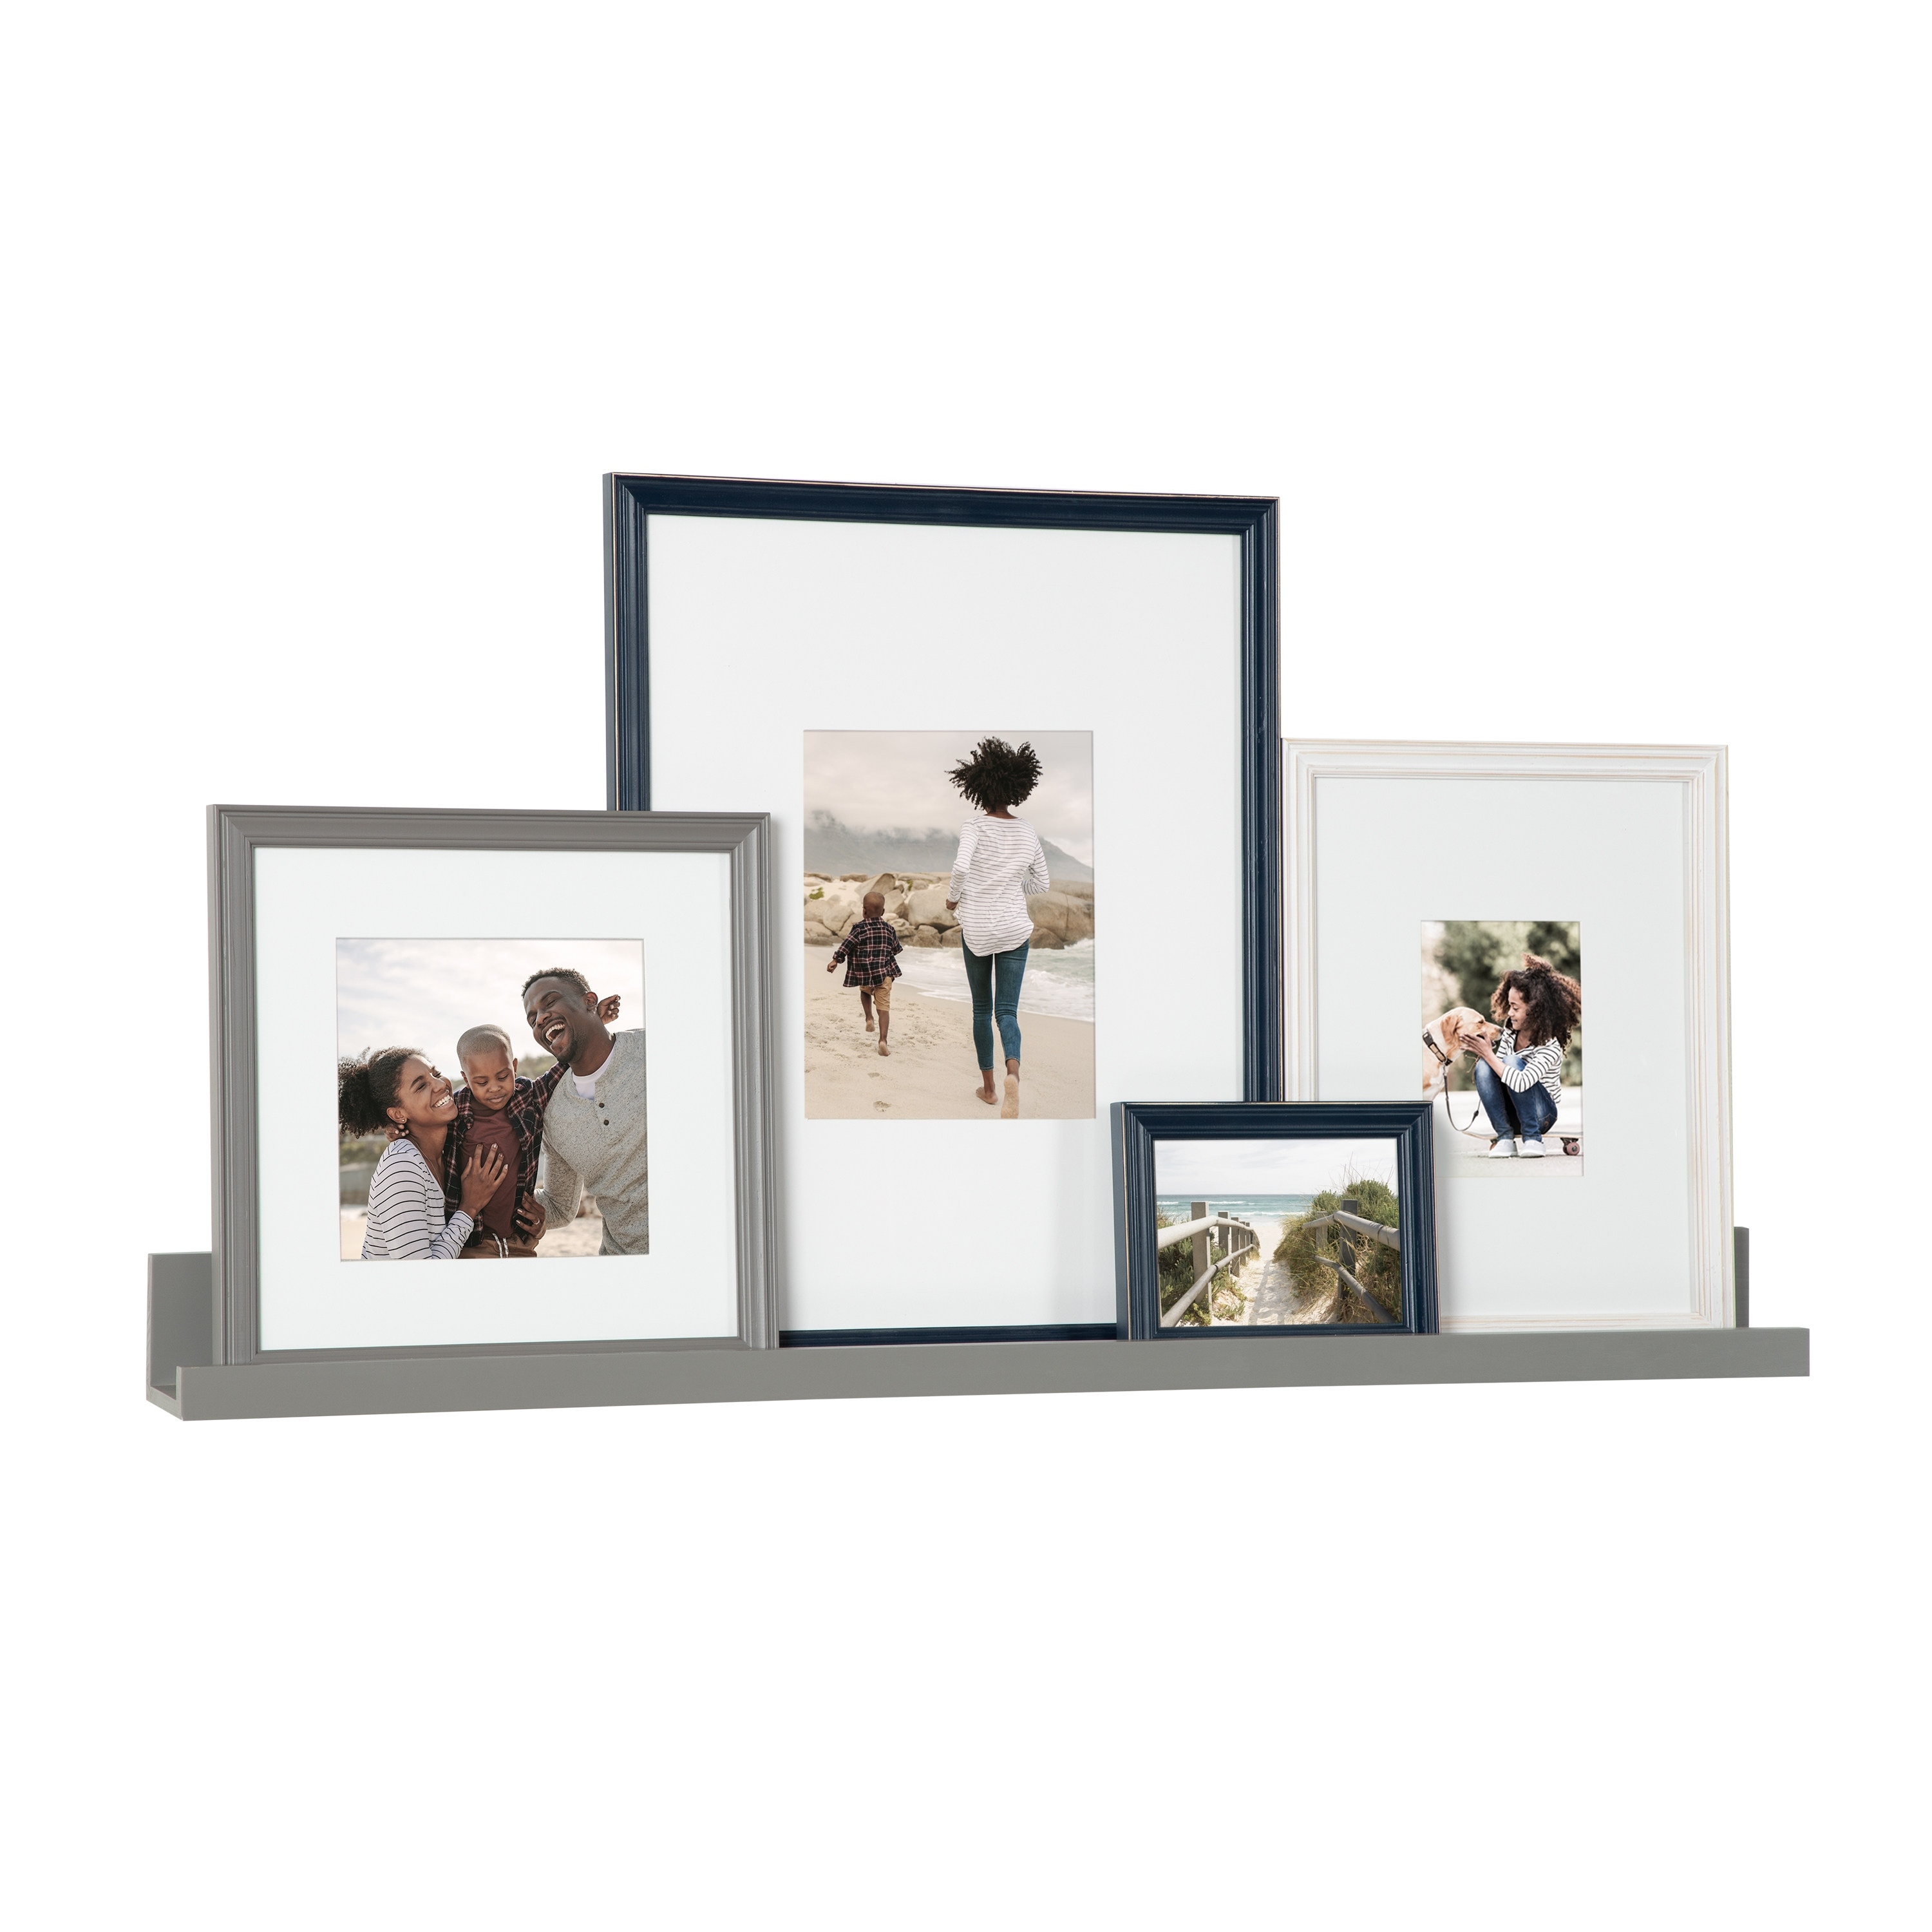 Bordeaux Transitional Picture Frame Set, Set of 5, Natural Rustic, Wooden Assorted Size Picture Frames with Shelf